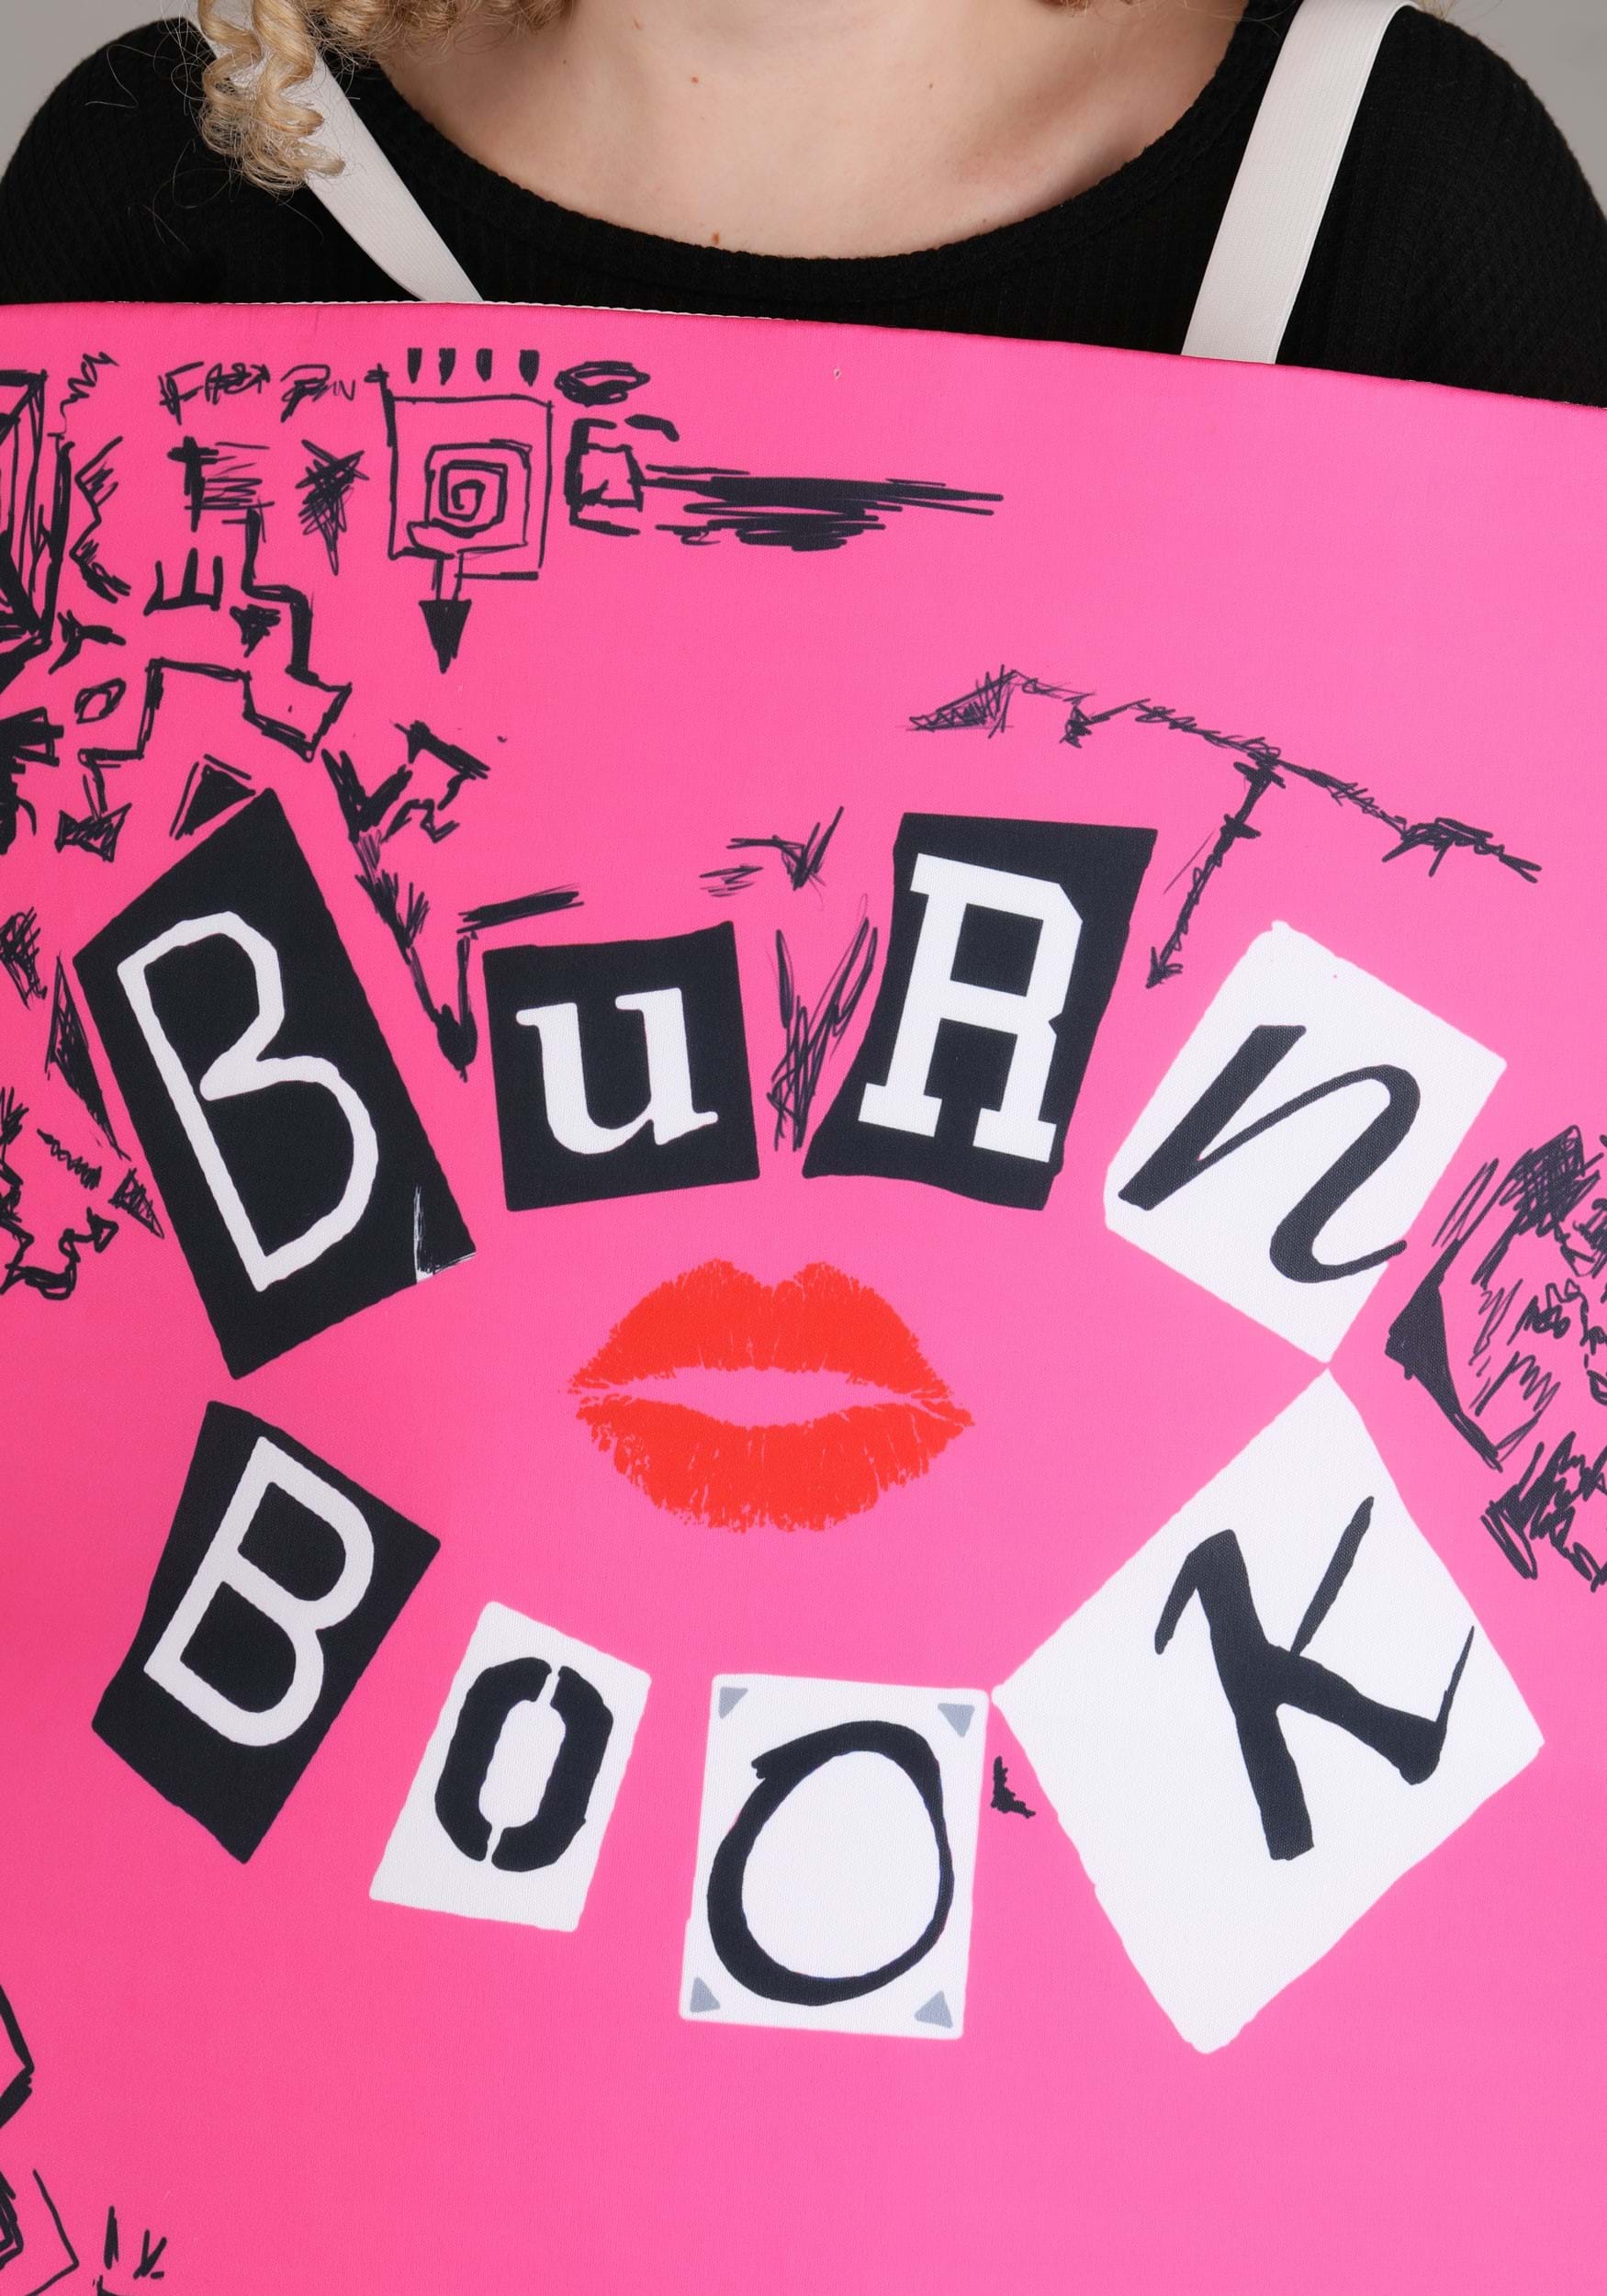 burn book letters